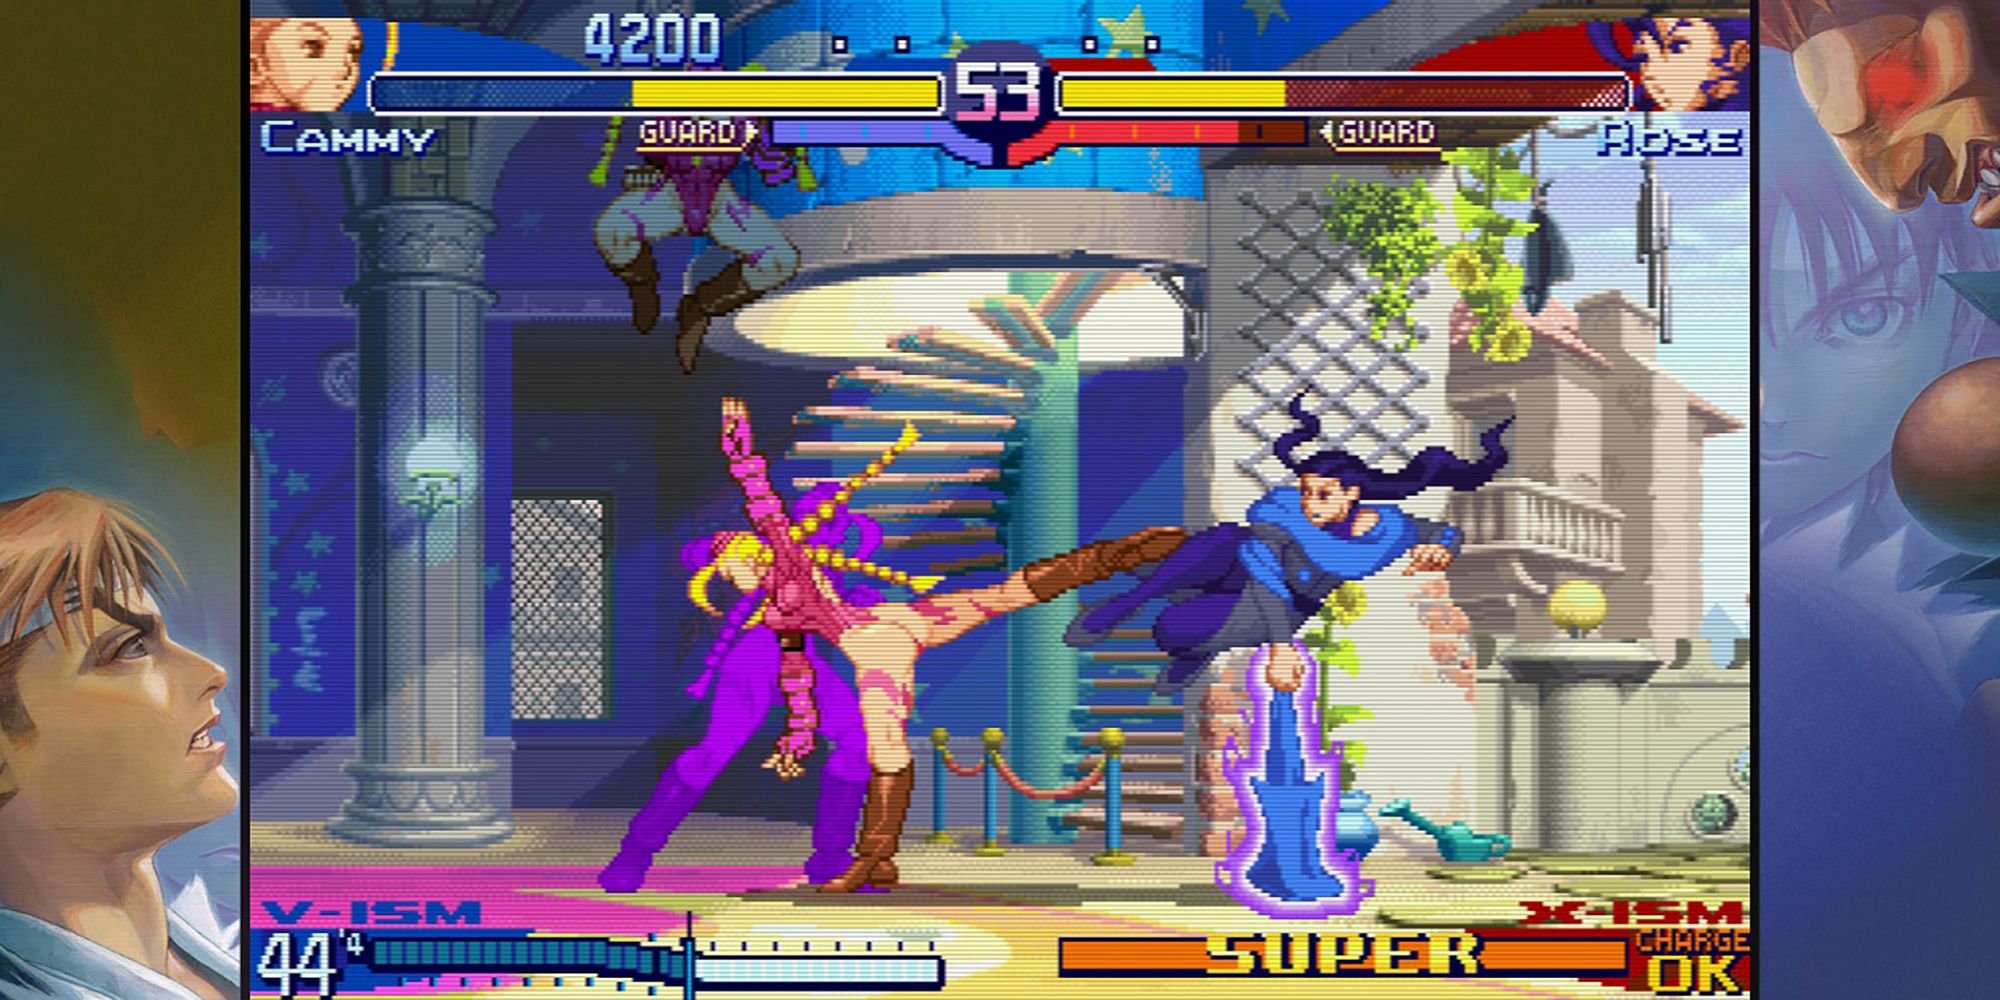 Cammy hits Rose with a custom combo during a match in an Italian villa in Street Fighter Alpha 3.